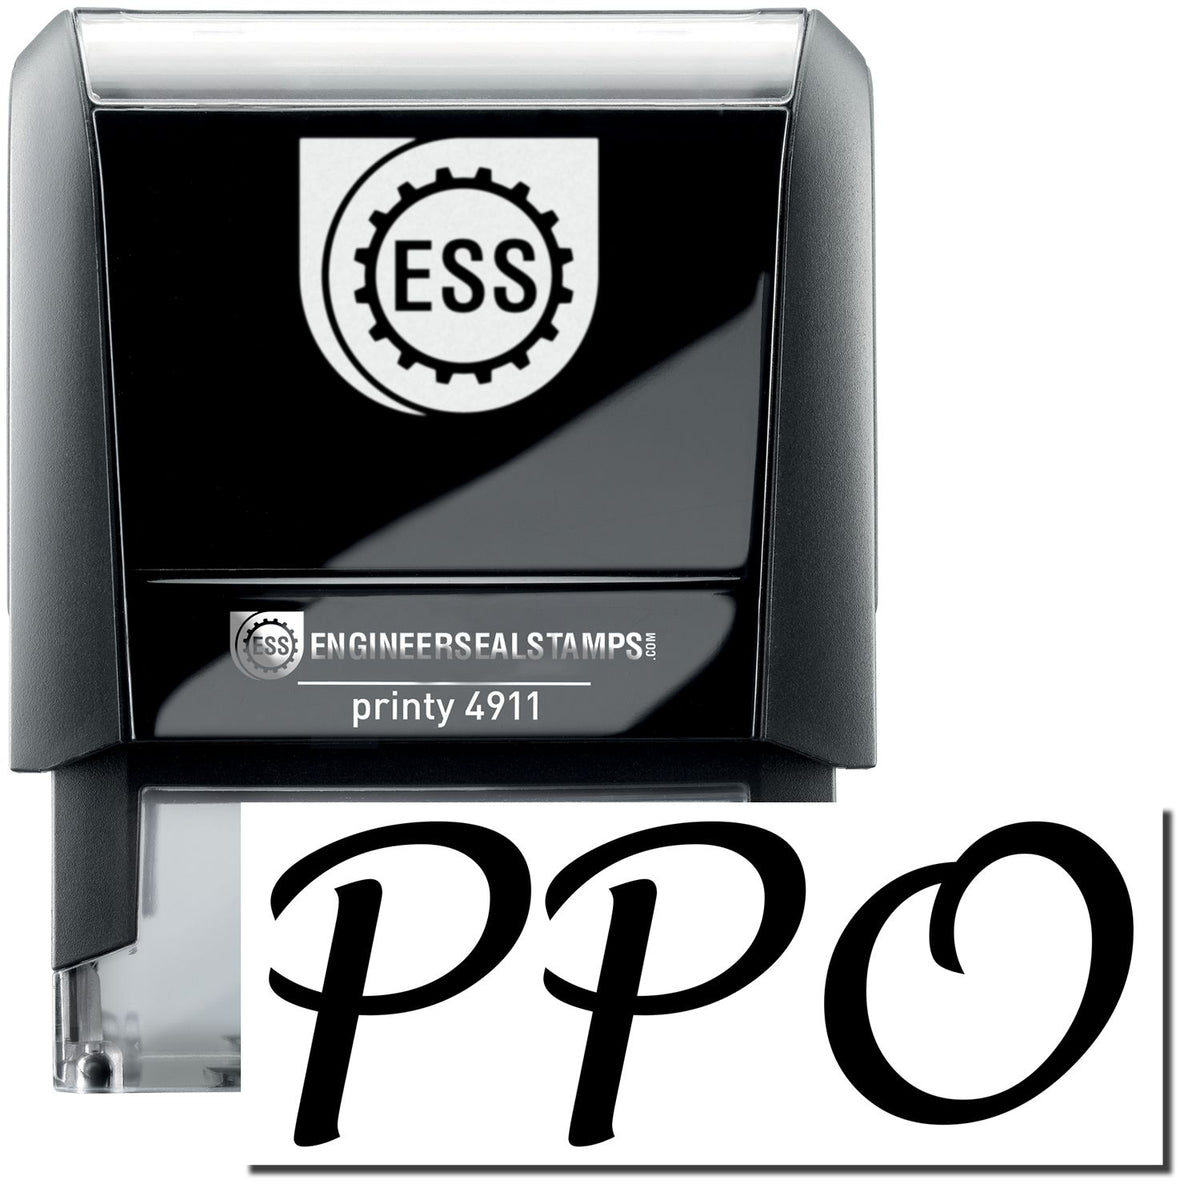 A self-inking stamp with a stamped image showing how the text &quot;PPO&quot; is displayed after stamping.